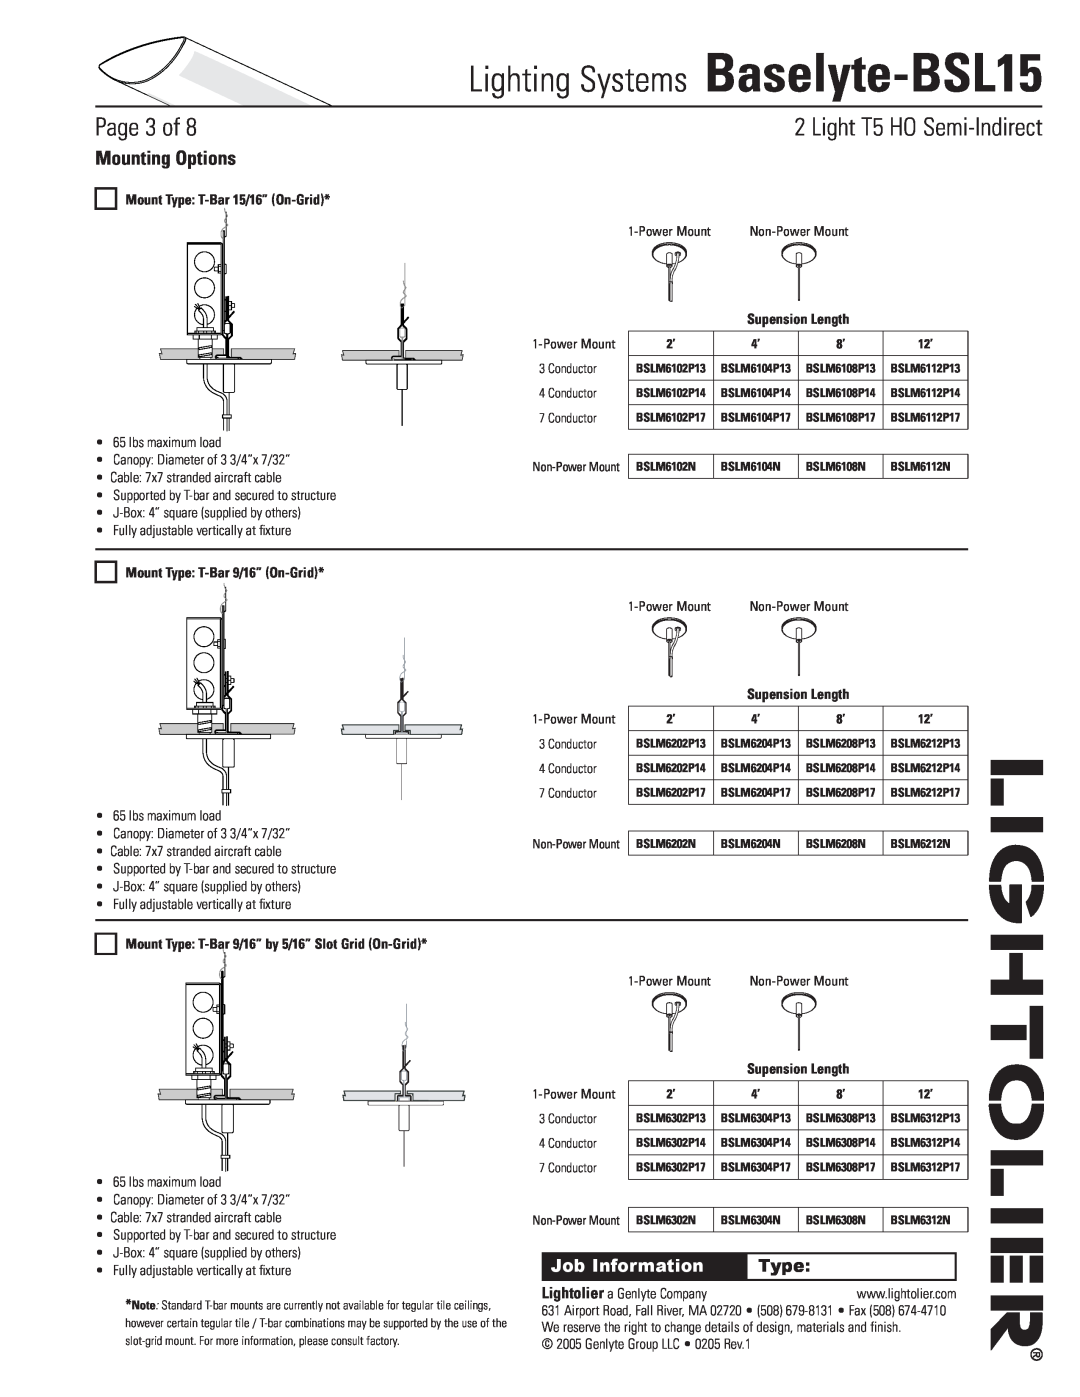 Lightolier Baselyte-BSL15 Mounting Options, Mount Type T-Bar15/16” On-Grid, Supension Length, Page of, Job Information 